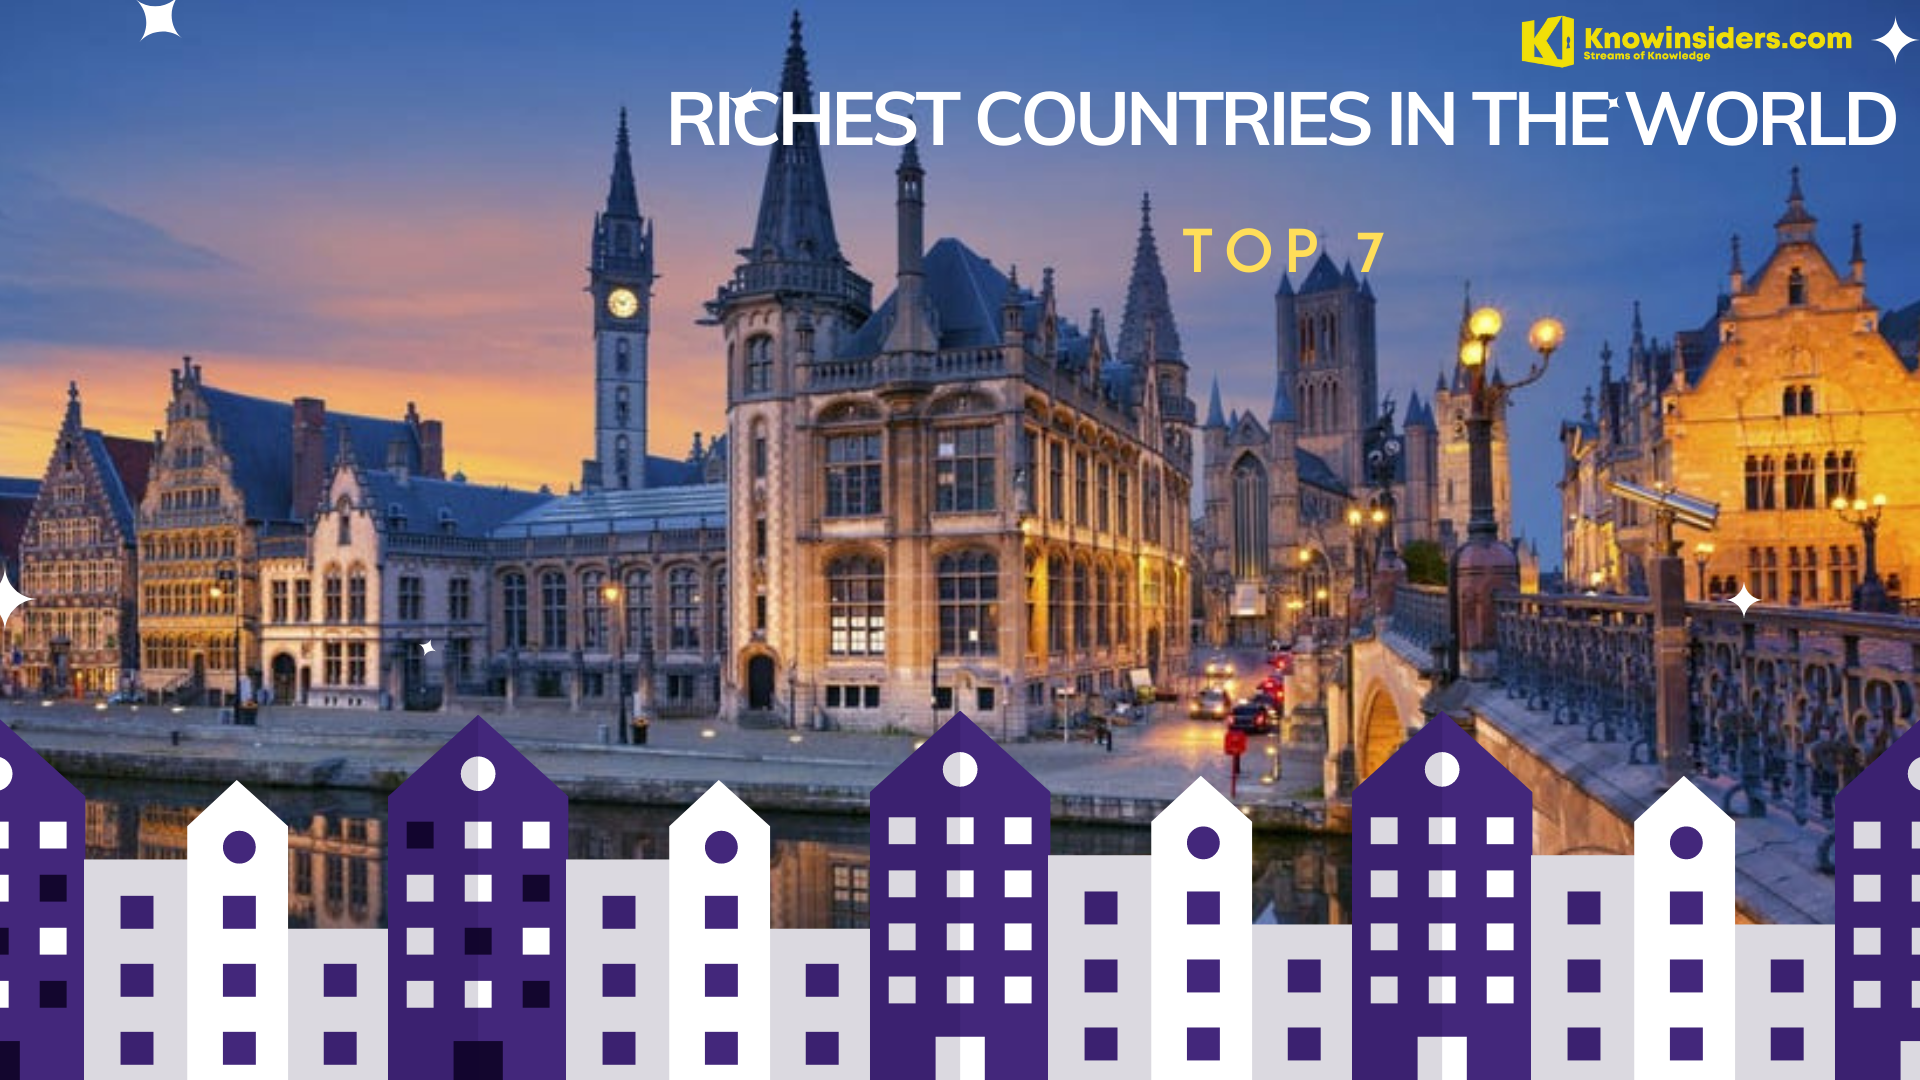 Top 9 Richest Countries In The World